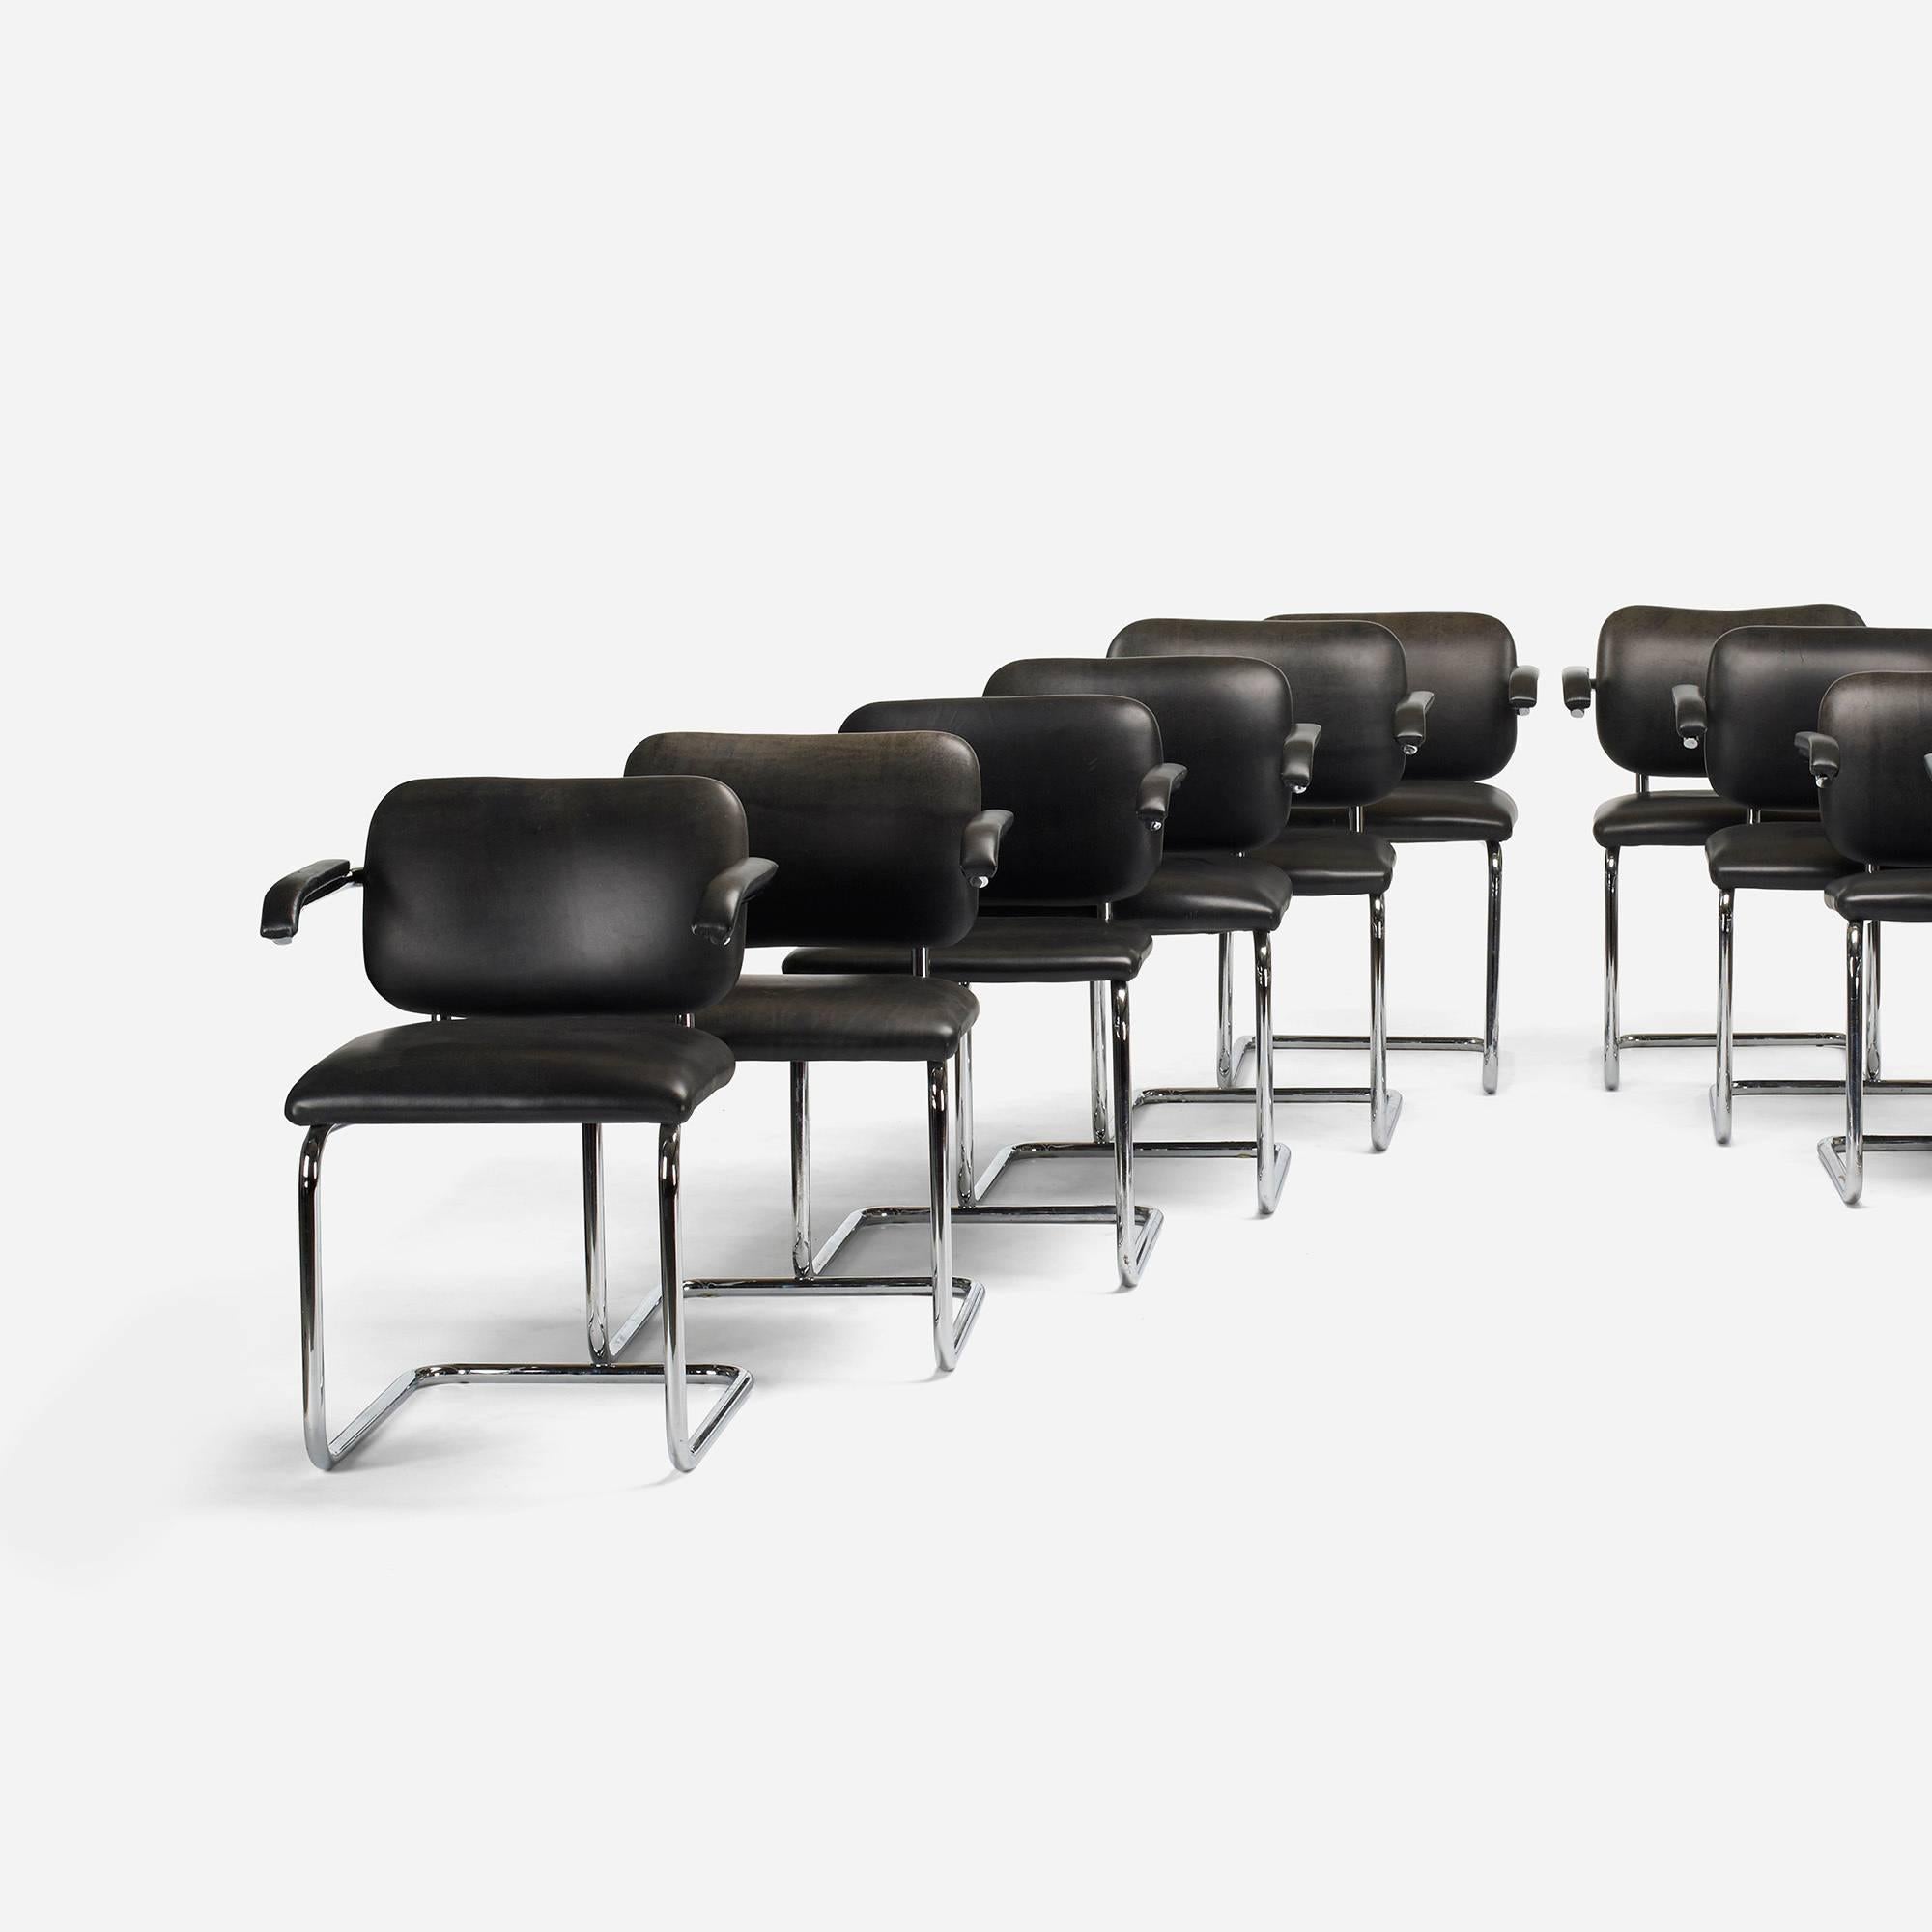 Cesca chairs, set of 12 by Marcel Breuer for Knoll International.